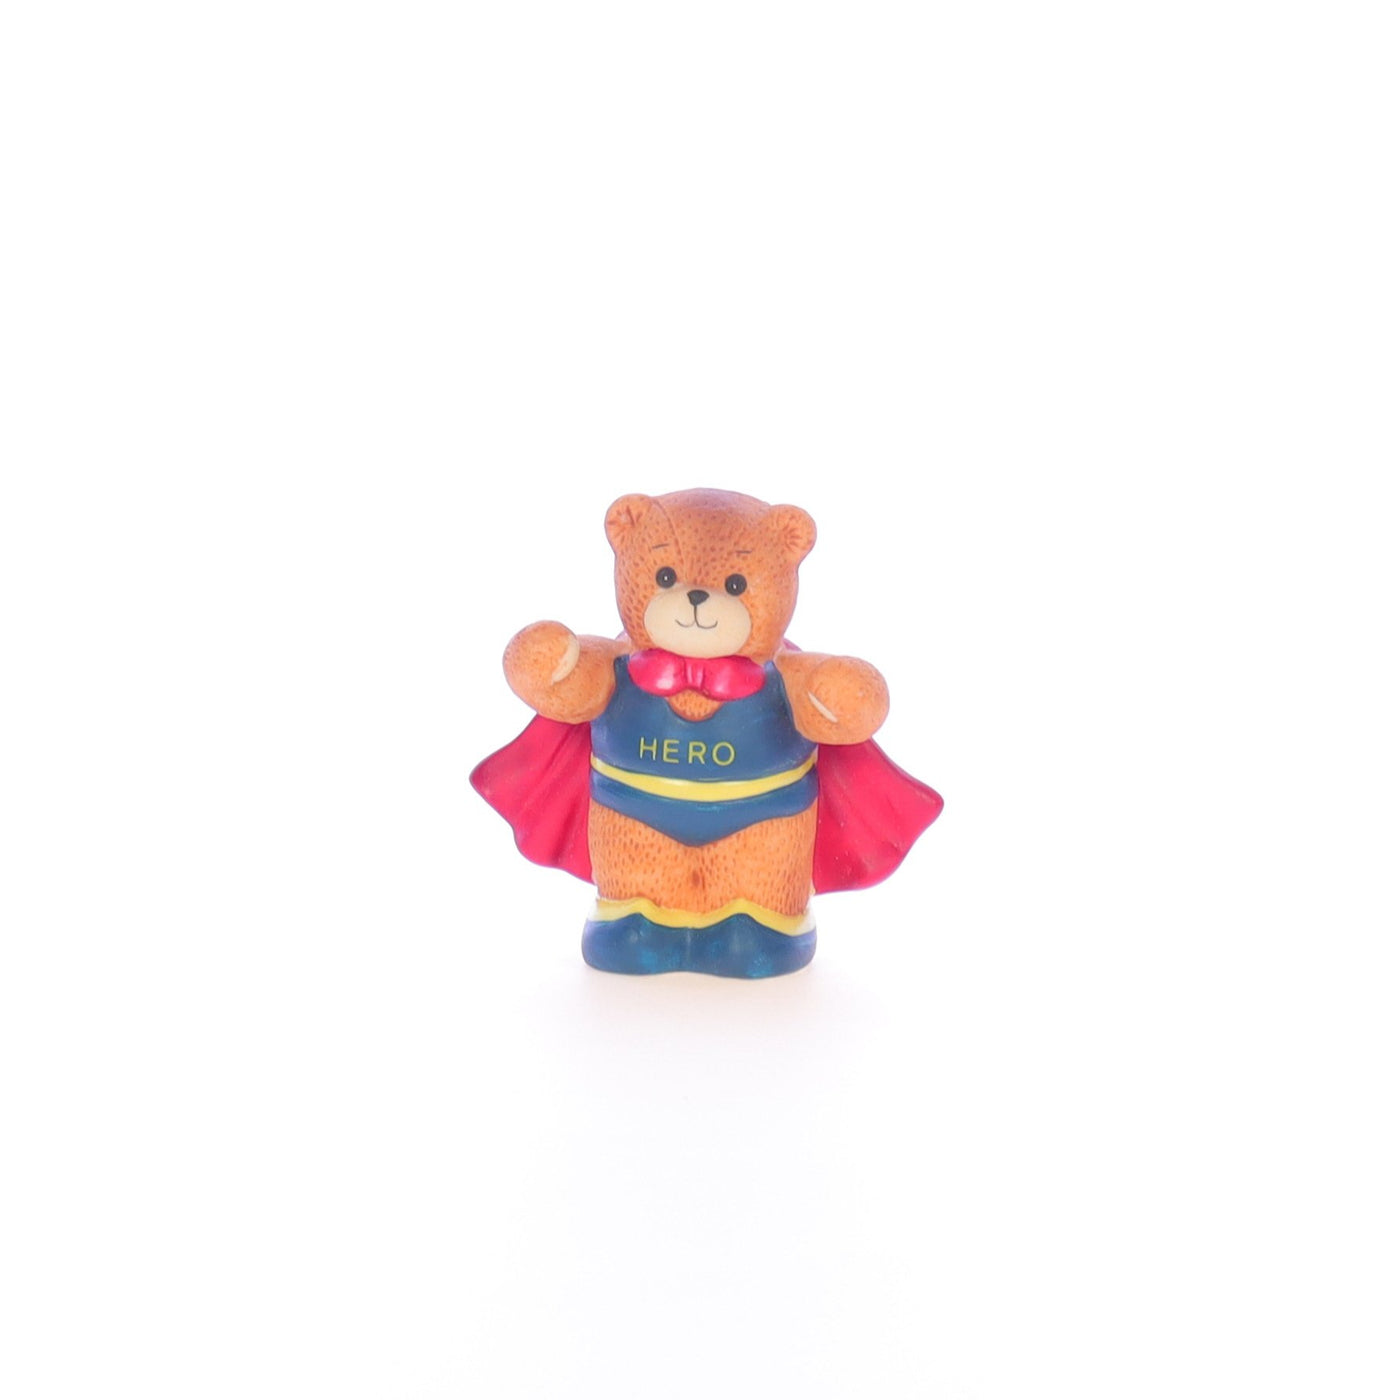 Lucy_And_Me_by_Lucy_Atwell_Porcelain_Figurine_Bear_in_Super_Hero_Costume_Lucy_Unknown_029_01